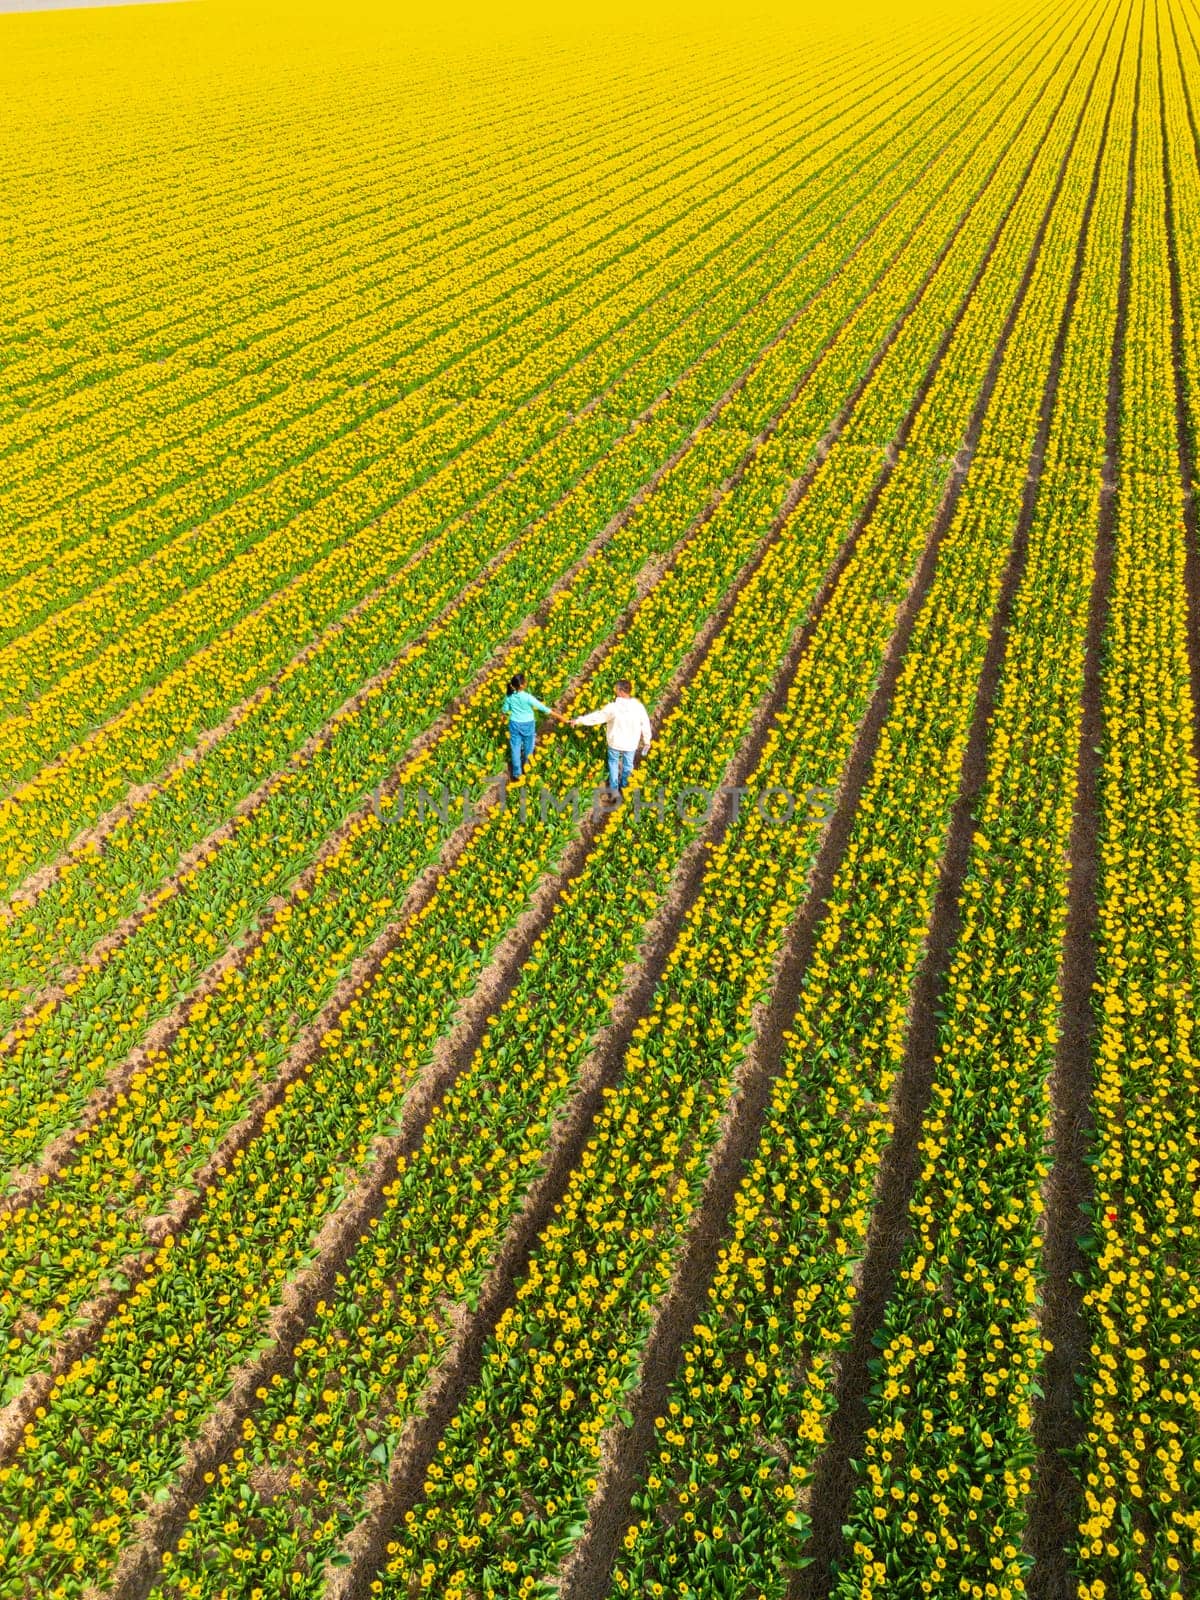 Men and women in flower fields seen from above with a drone in the Netherlands, Tulip fields in the Netherlands during Spring, diverse couple in spring flower field Springtime